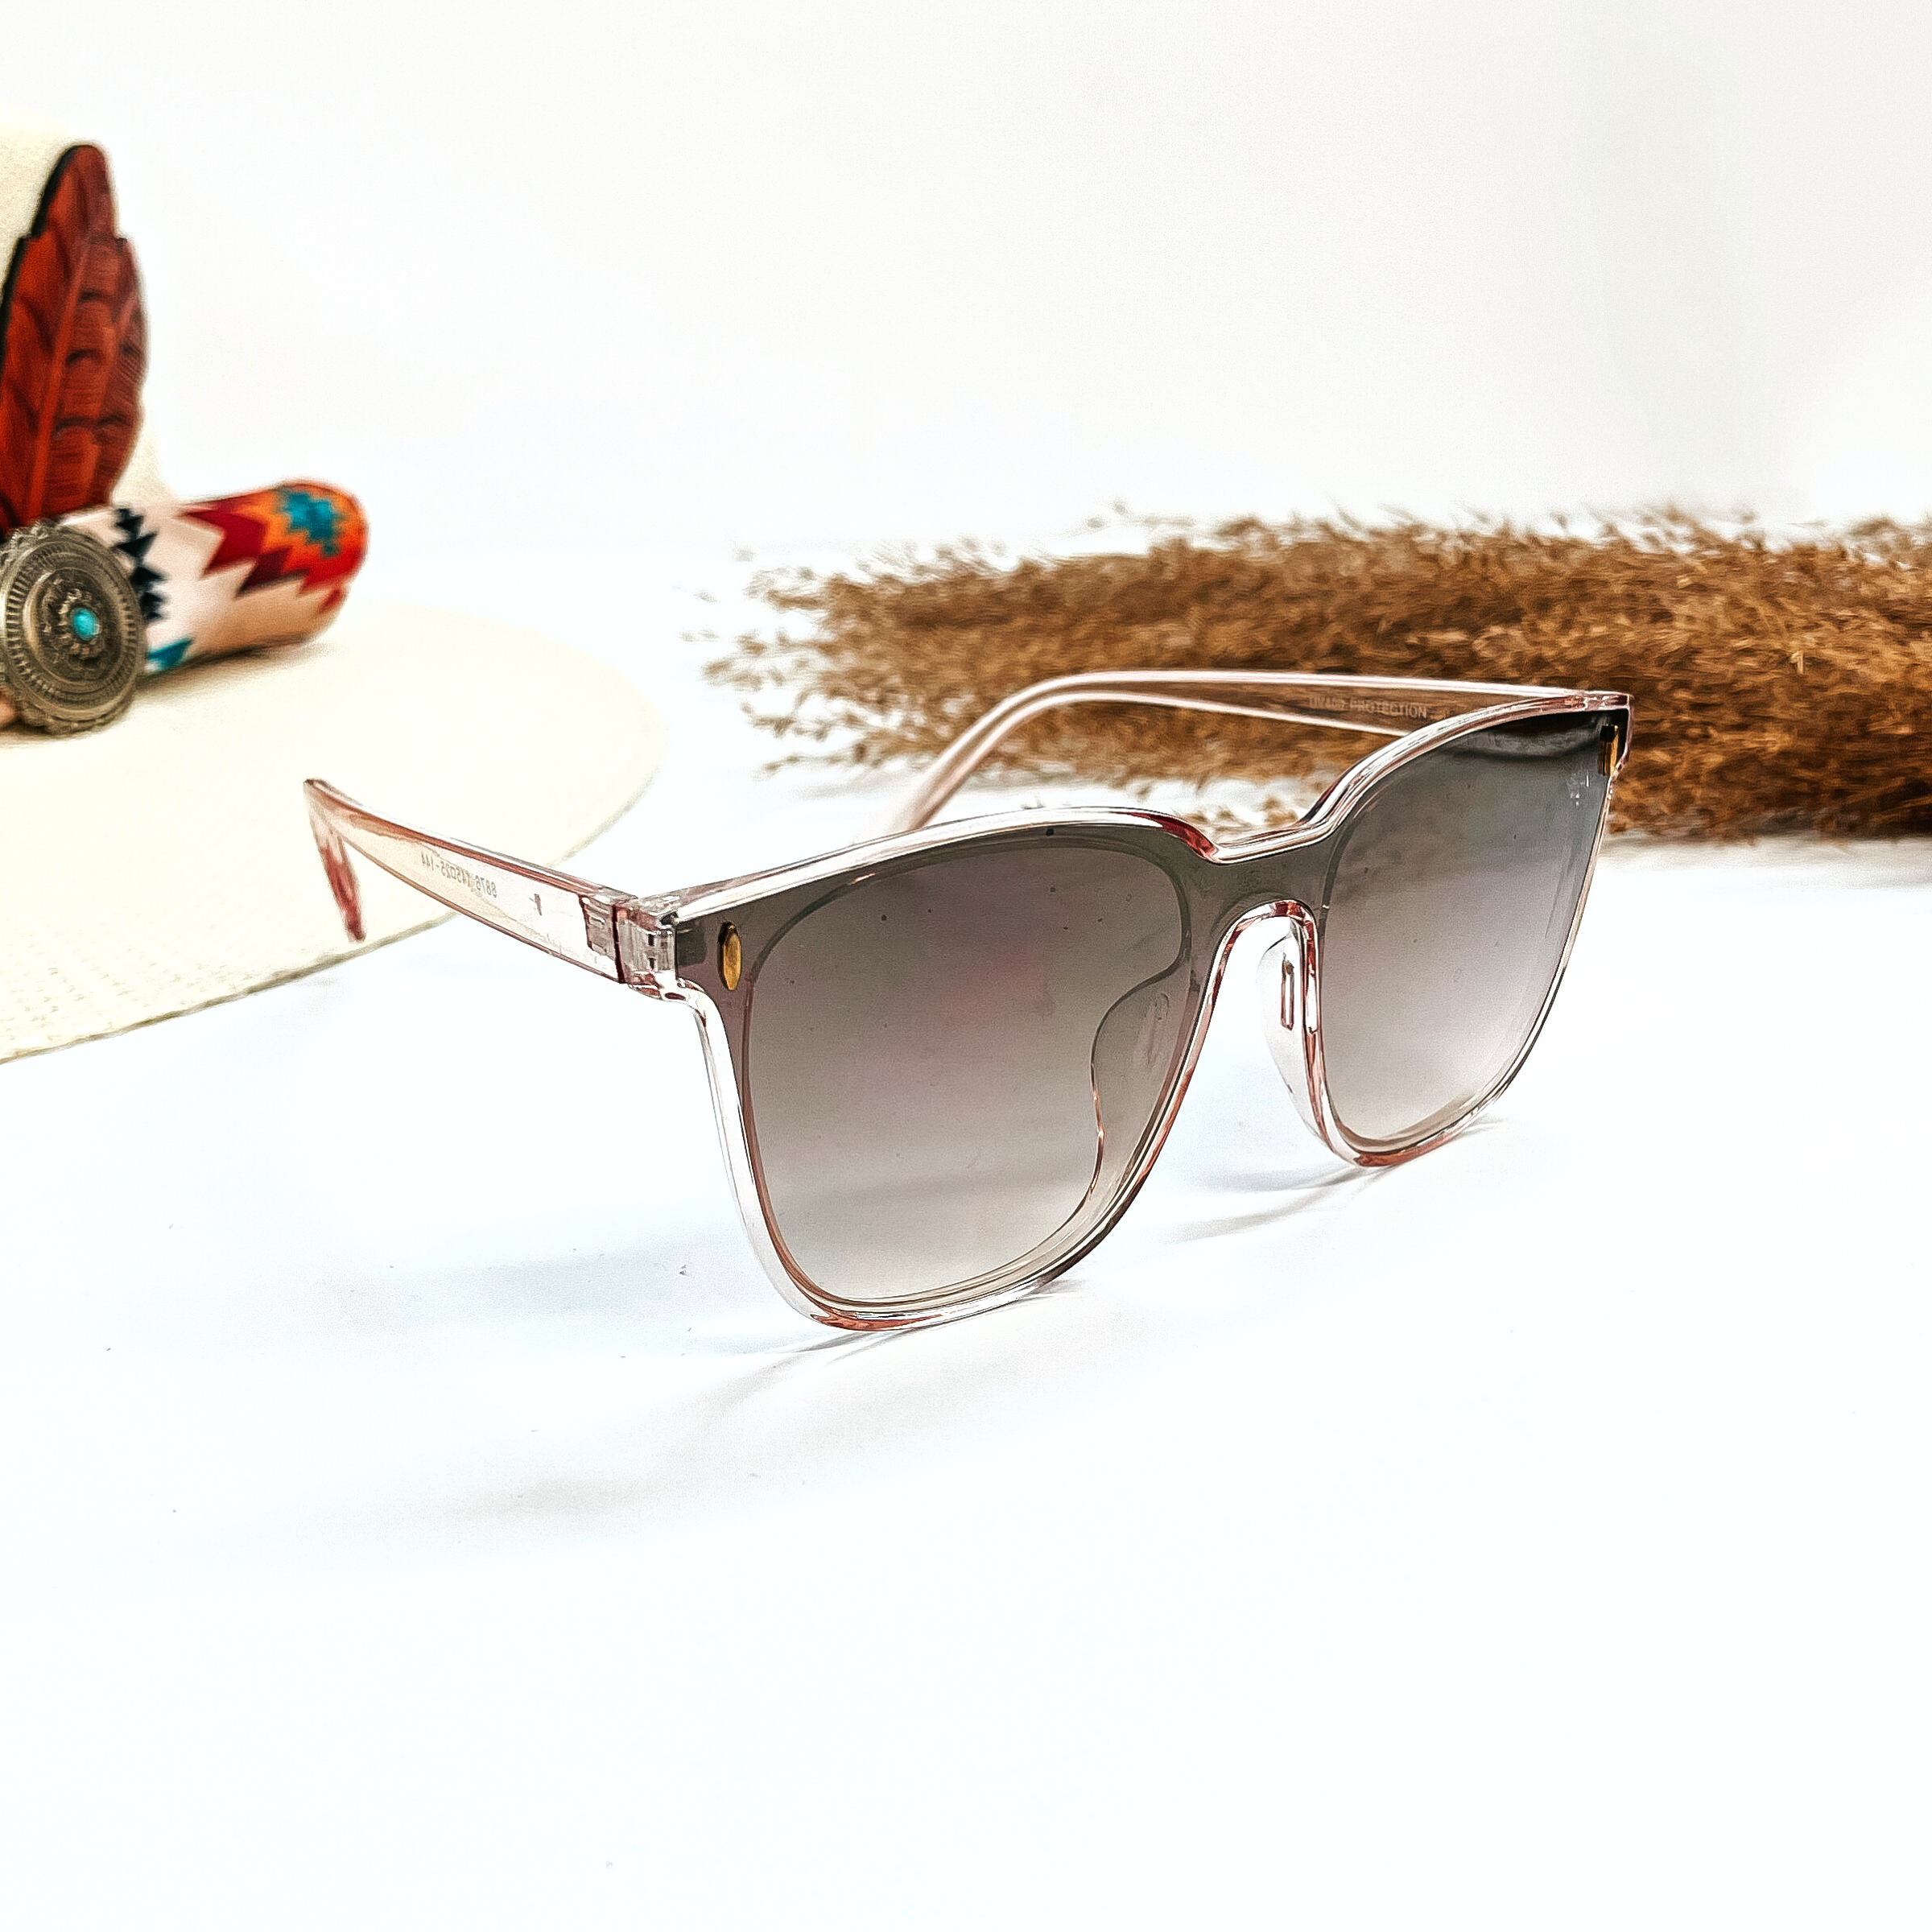 This is a pair of wayfarer style sunglasses with a transparent/clear light pink frame,  grey/light pink gradient lense with a gold tone detailing. These sunglasses are taken on a white  background, there is a straw hat with a colorful aztec print hat band and a brown plant  in the side as decor.